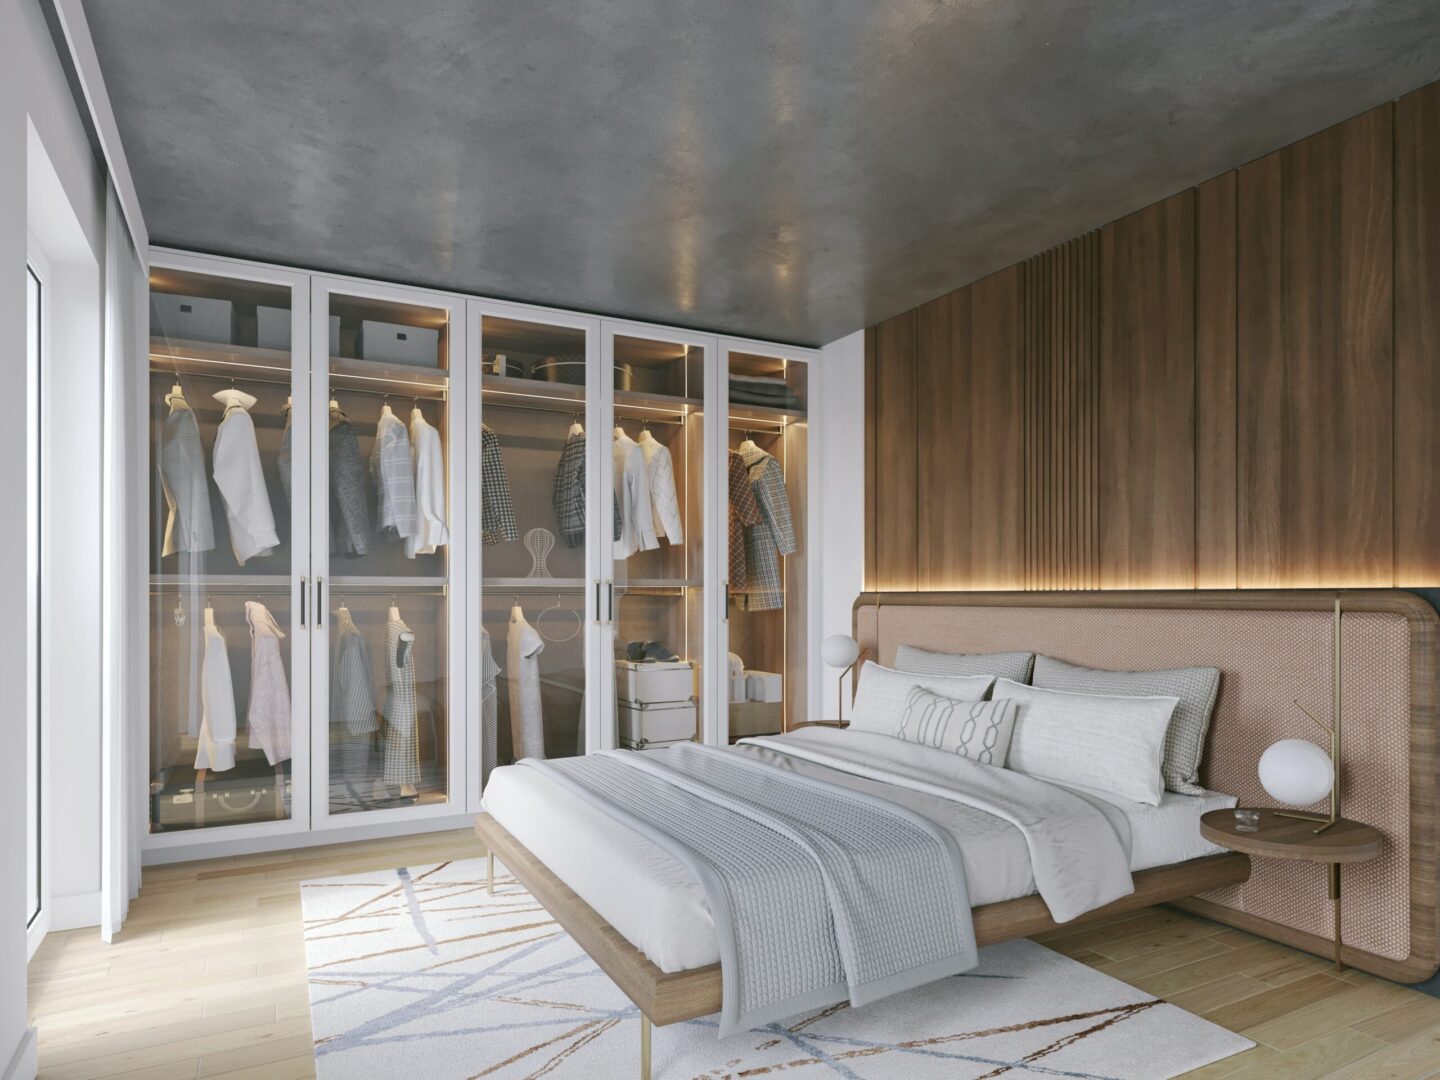 A bedroom with a bed and closet in it